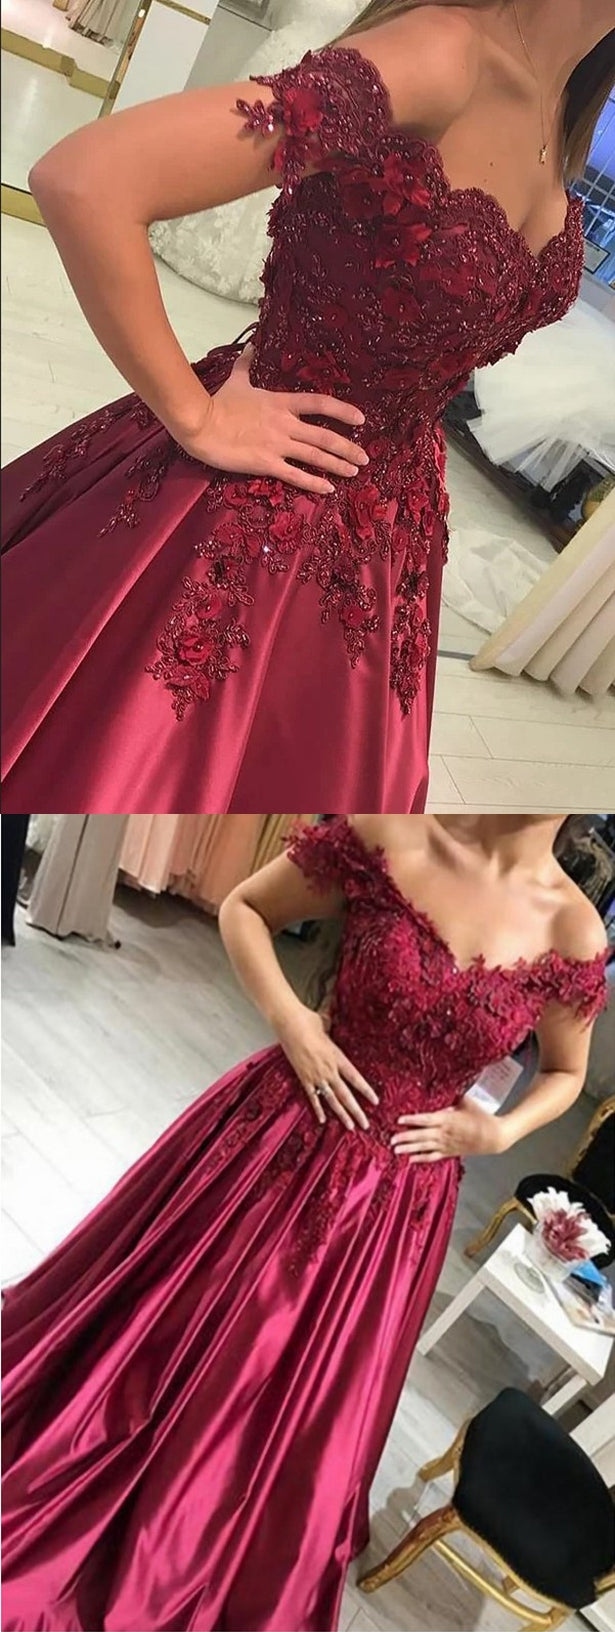 Ball Gown Off The Shoulder Straps, Prom Dress For Teens, Evening Dress, Formal Dresses, Graduation School Party Dance Dress